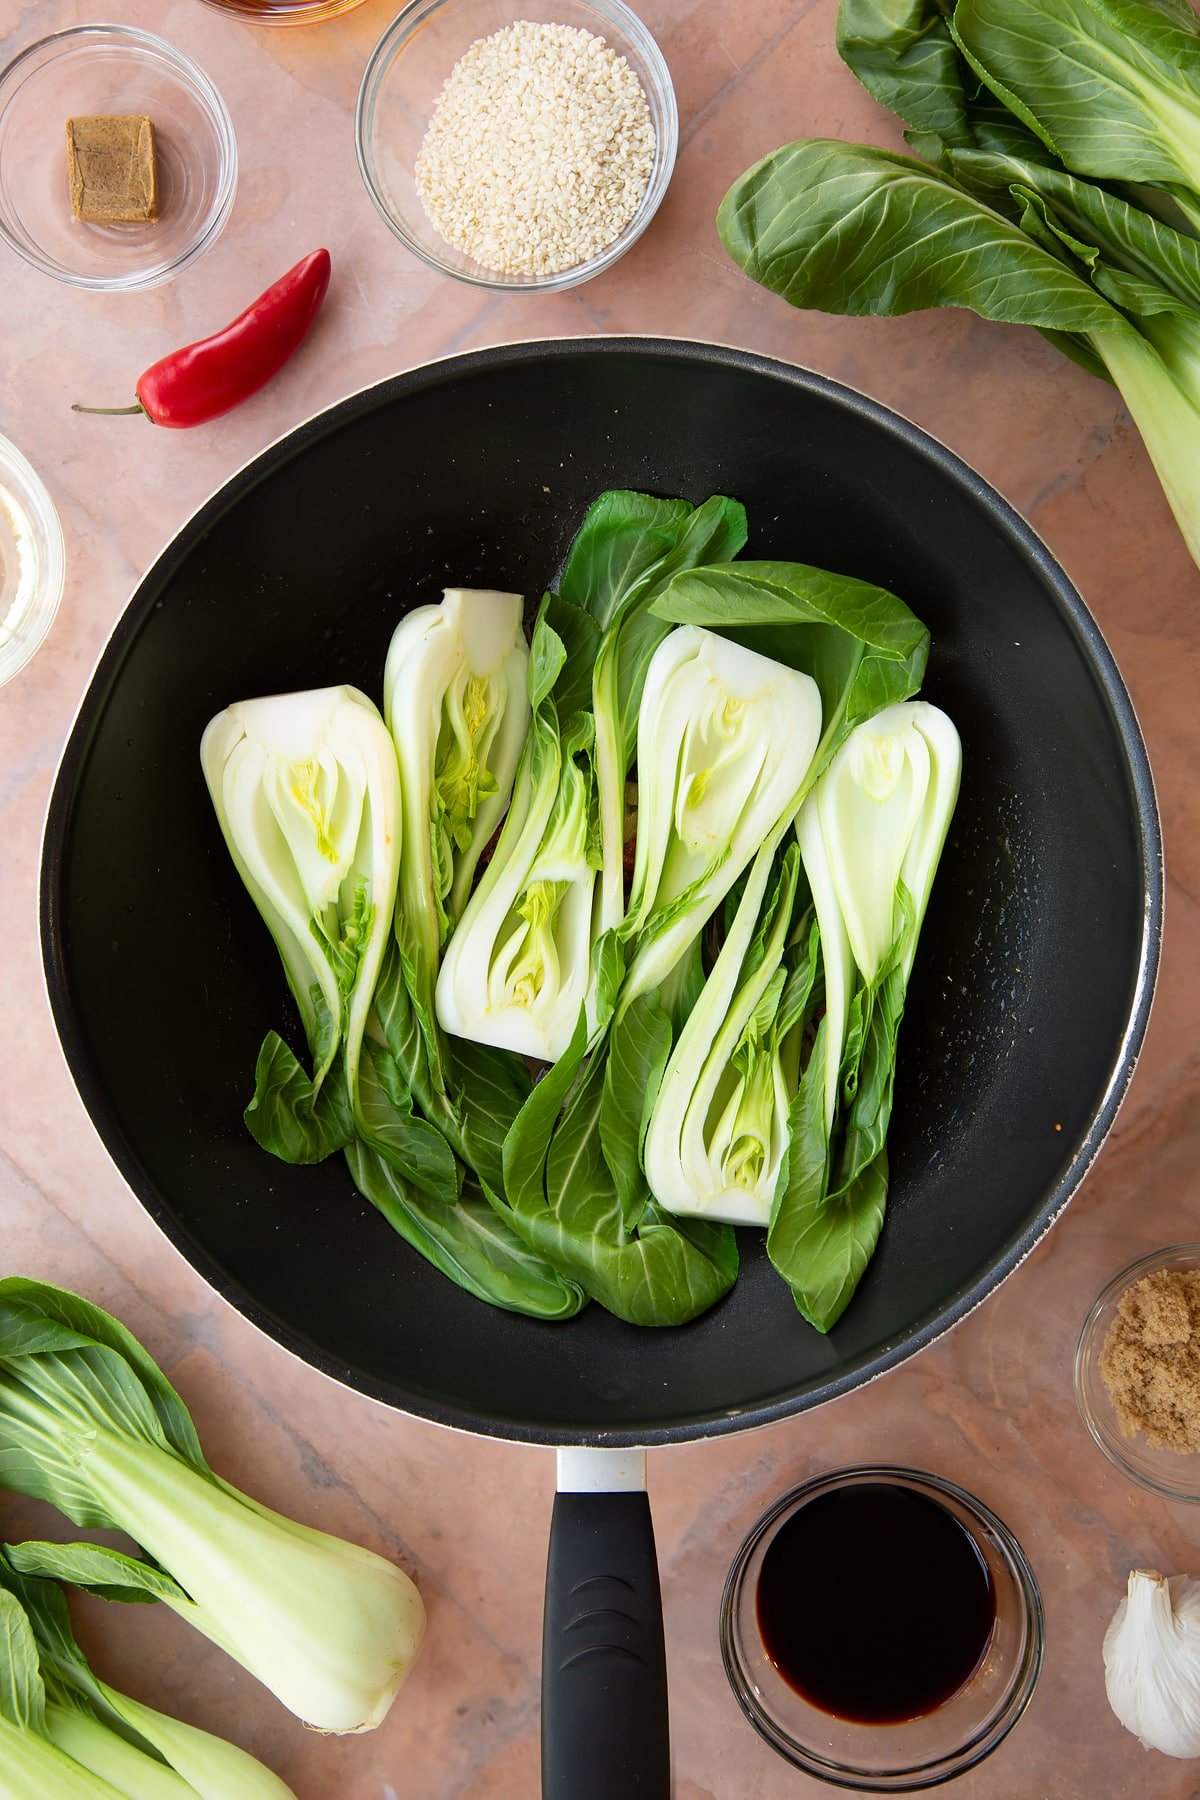 Adding the pak choi to the pan of ingredients.